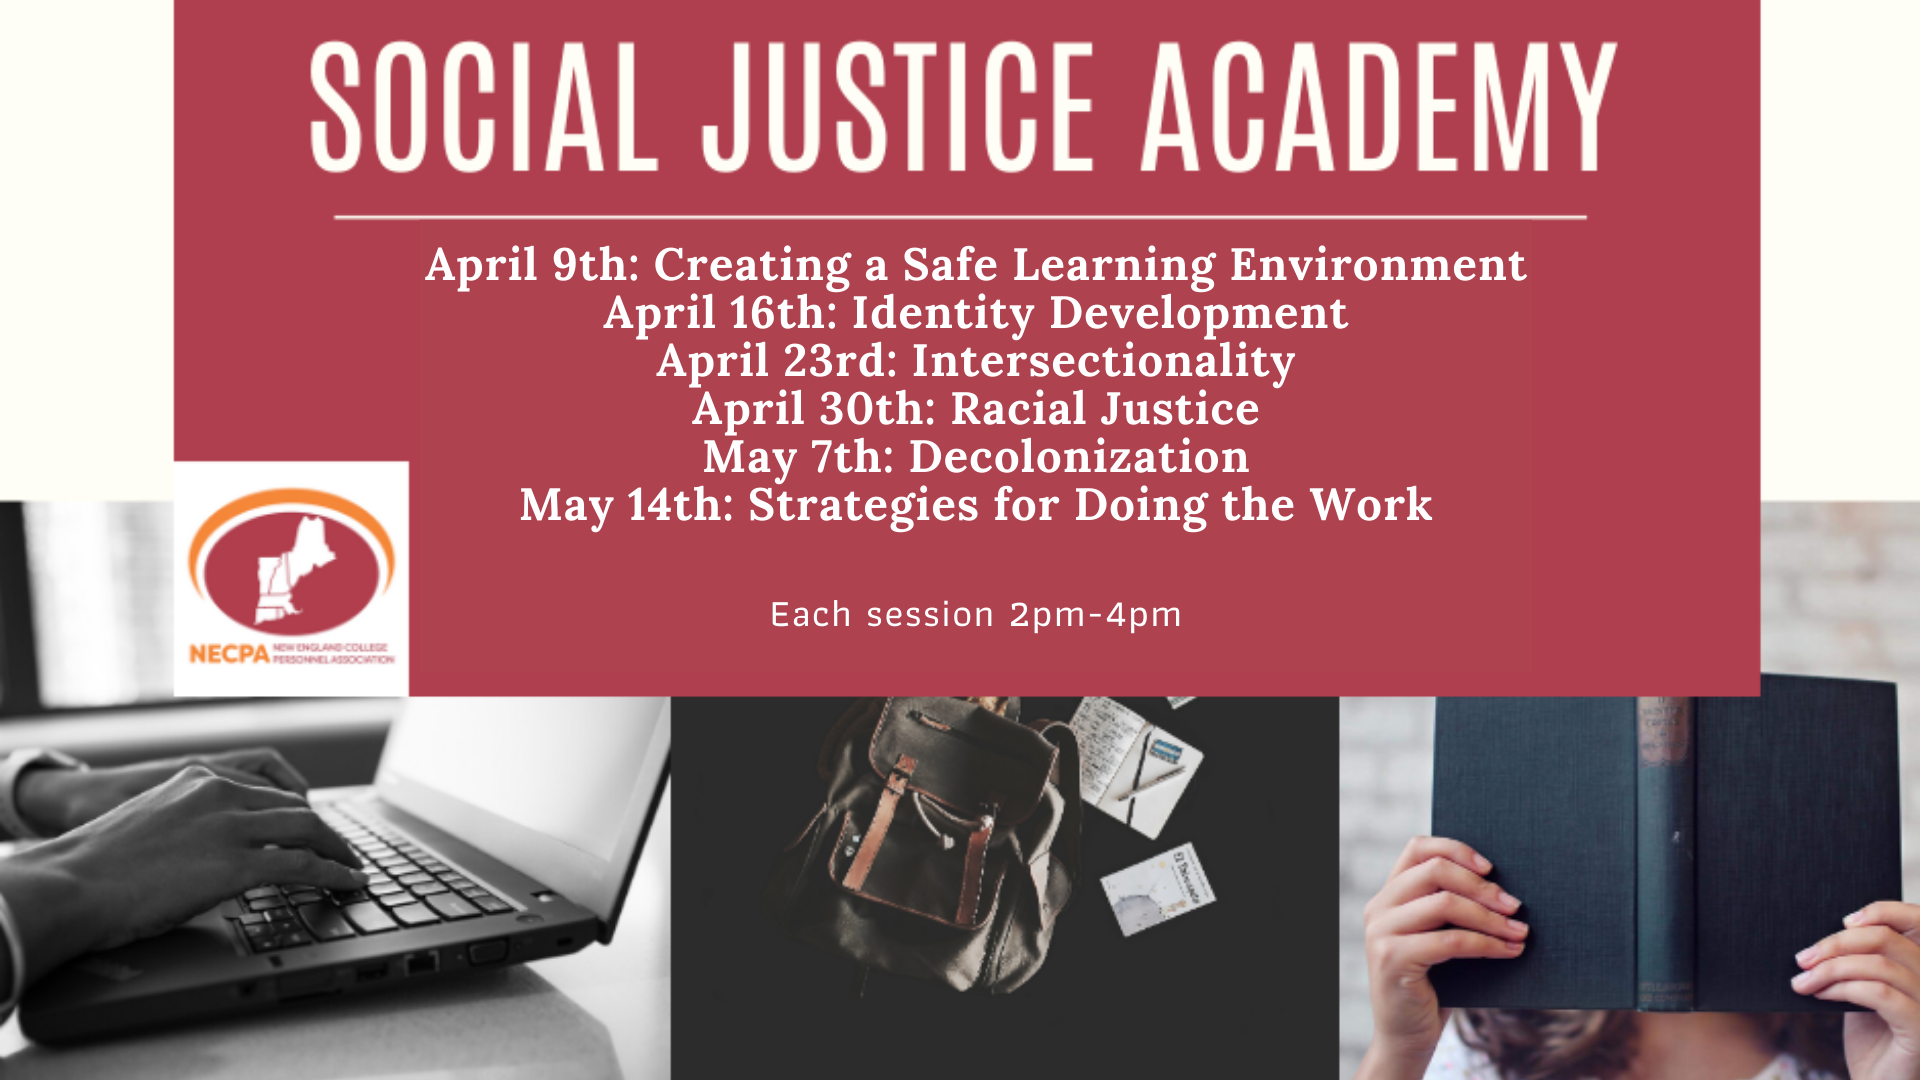 Social Justice Academy flier showing upcoming sessions on creating a safe learning environment, identity development, intersectionality, racial justice, decolonization, and strategies for the doing the work